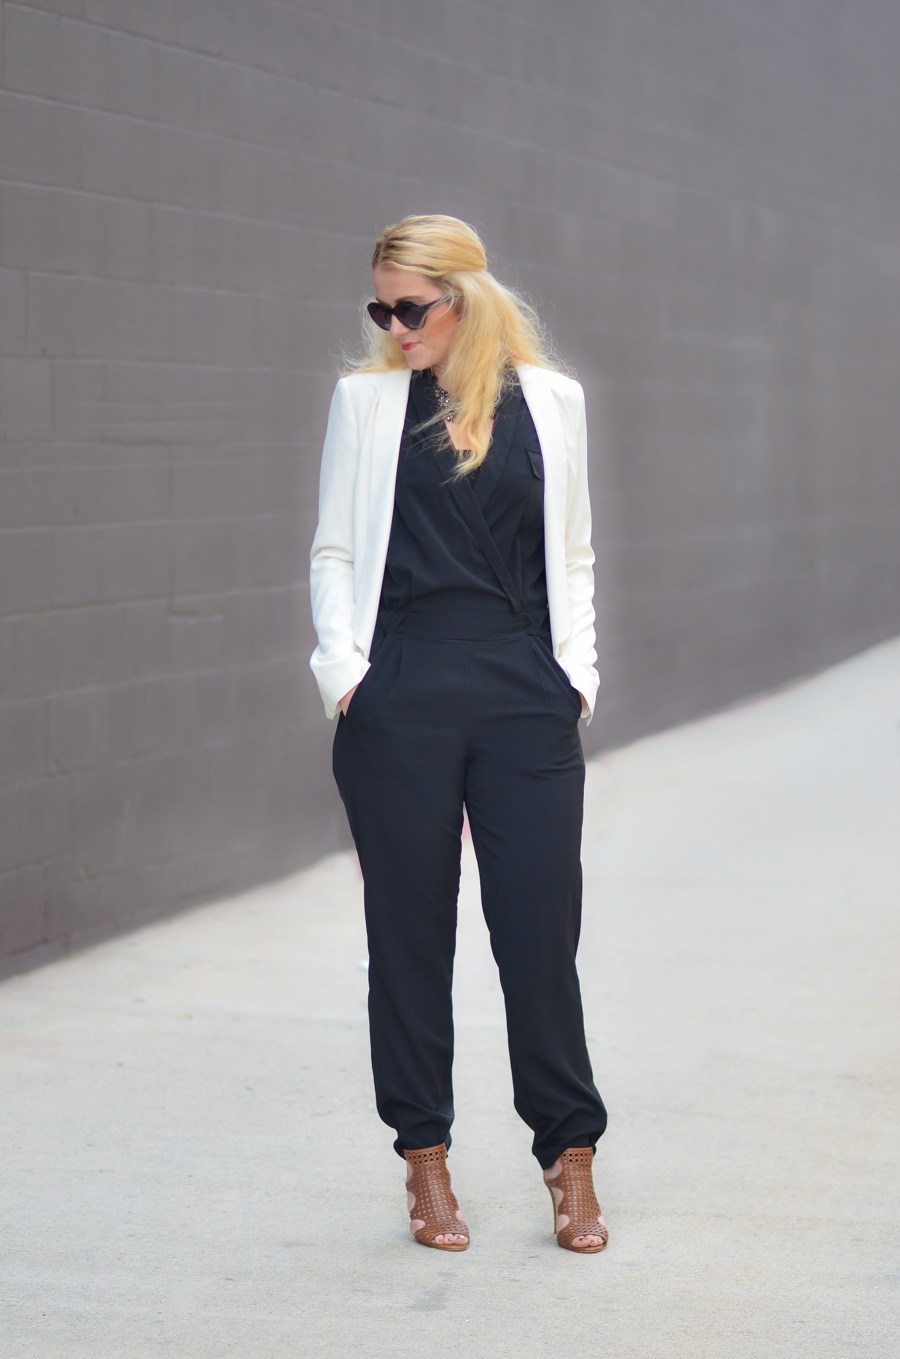 How to Wear a White Blazer - Outfit Ideas